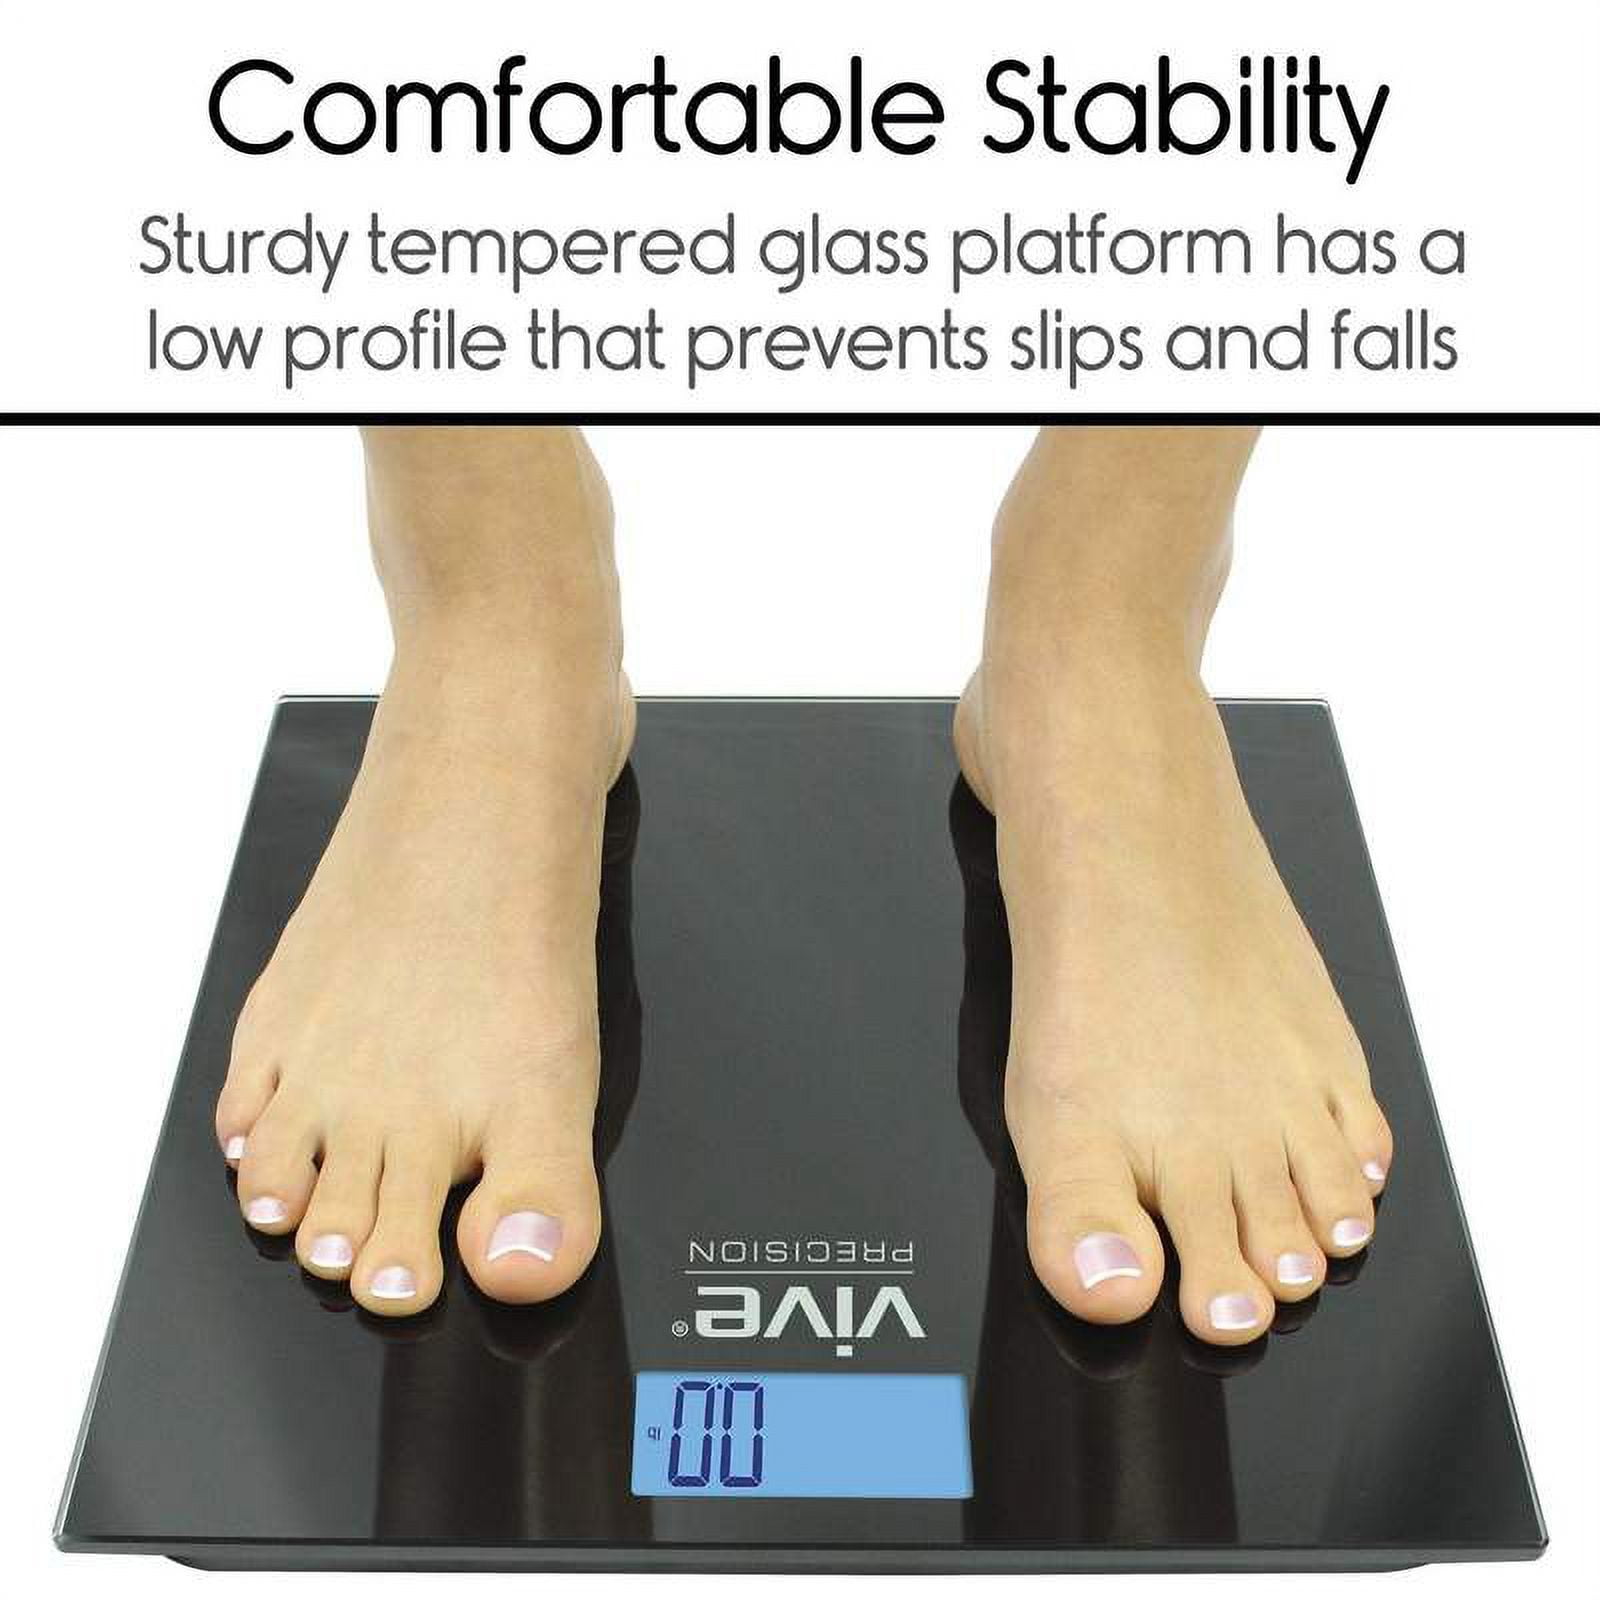 Digital Scales, Weight Scales, & Balances. Shopping Made Easy.